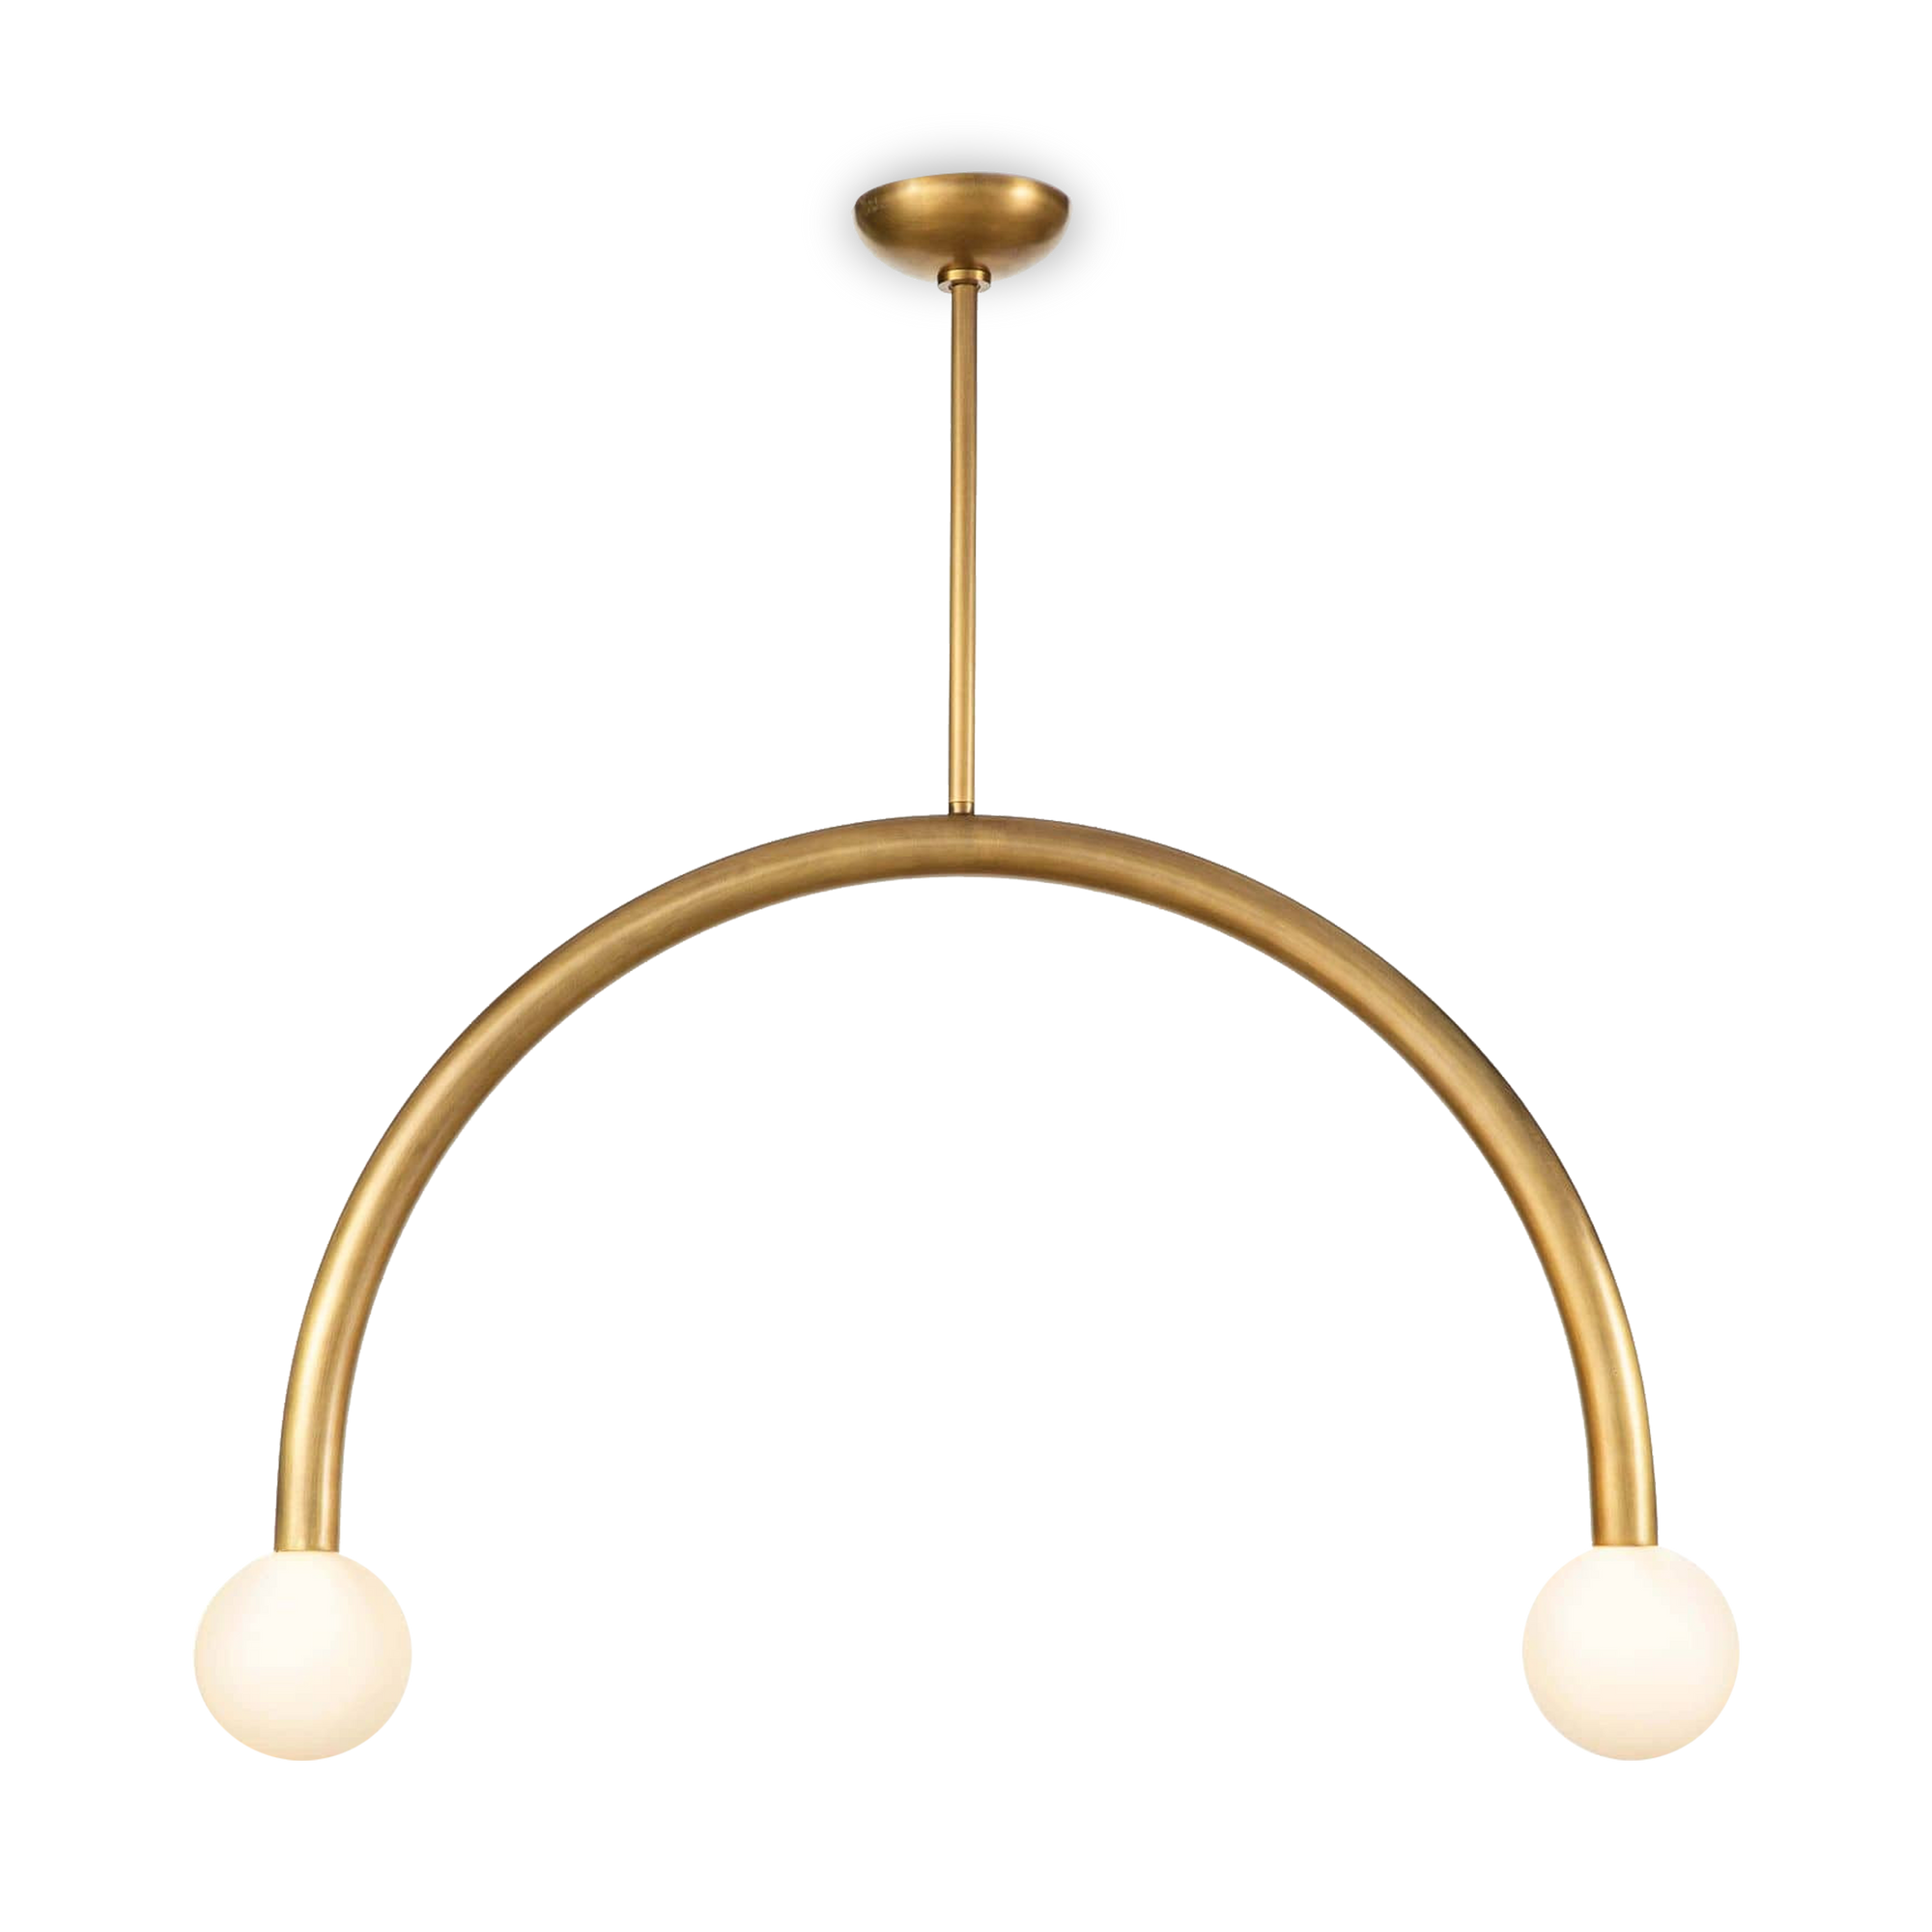 The Happy Pendant is a unique mix of modern and playful.